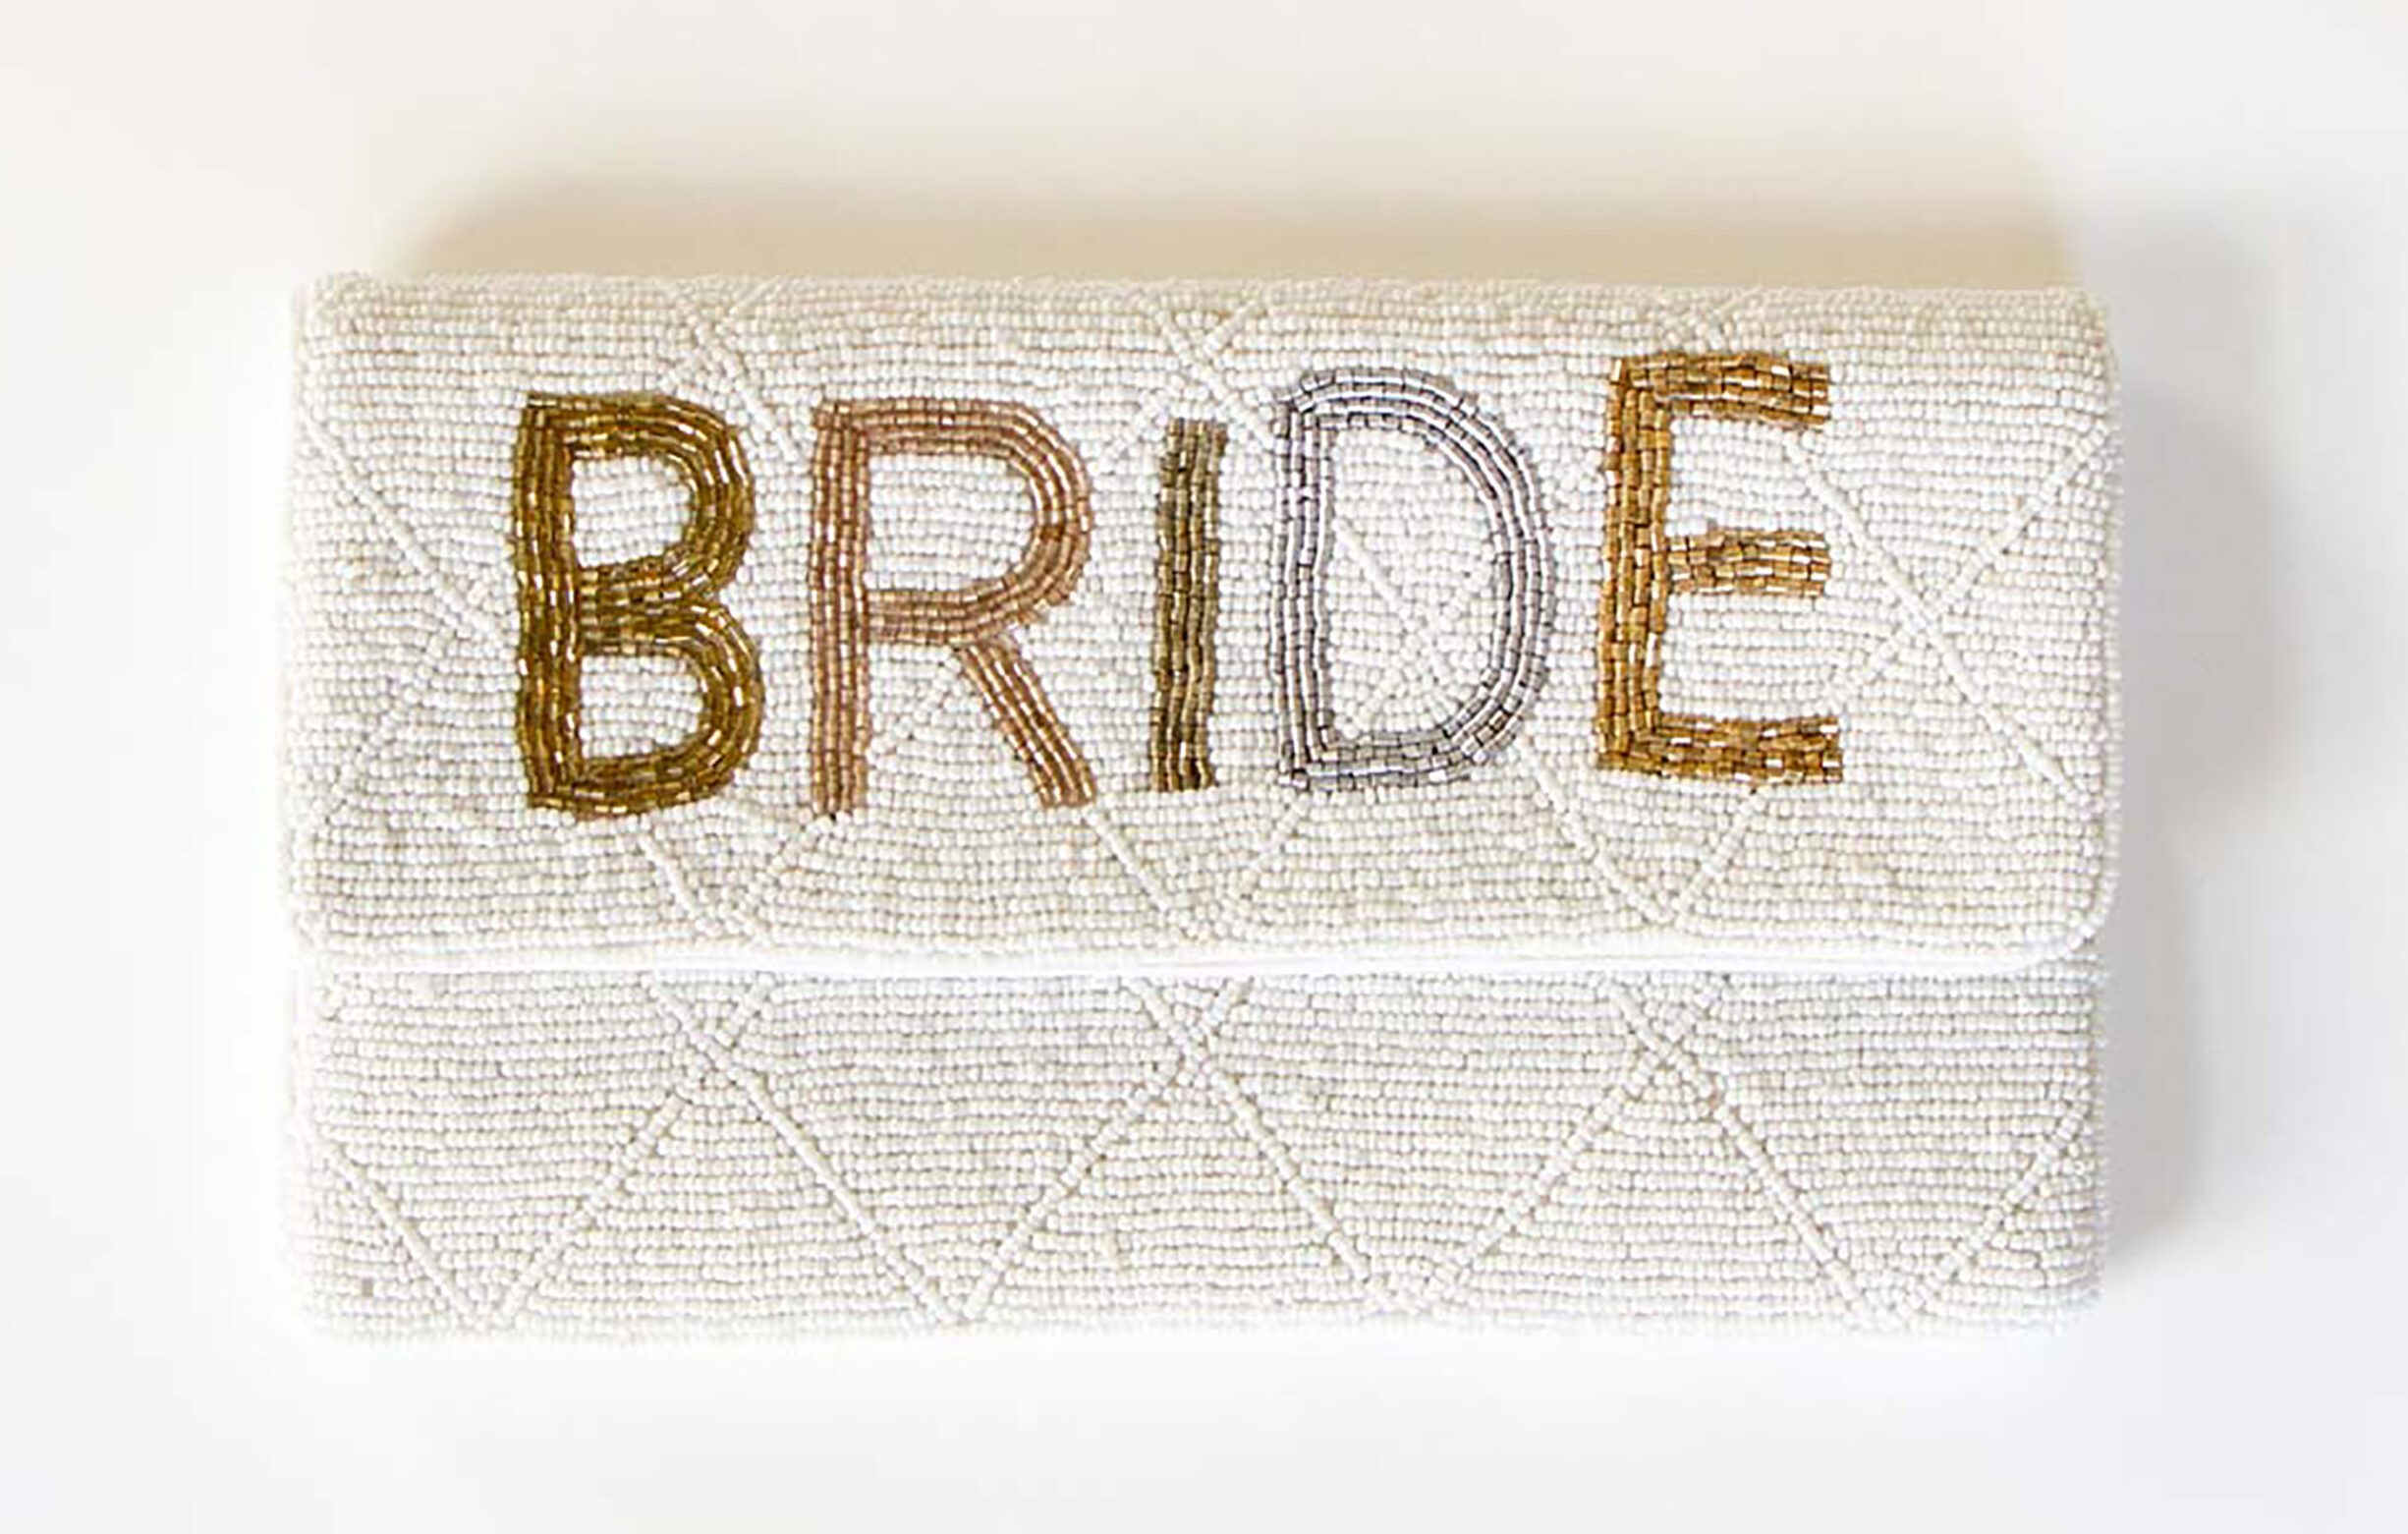 This beaded bride clutch is a unique accessory for the bride.